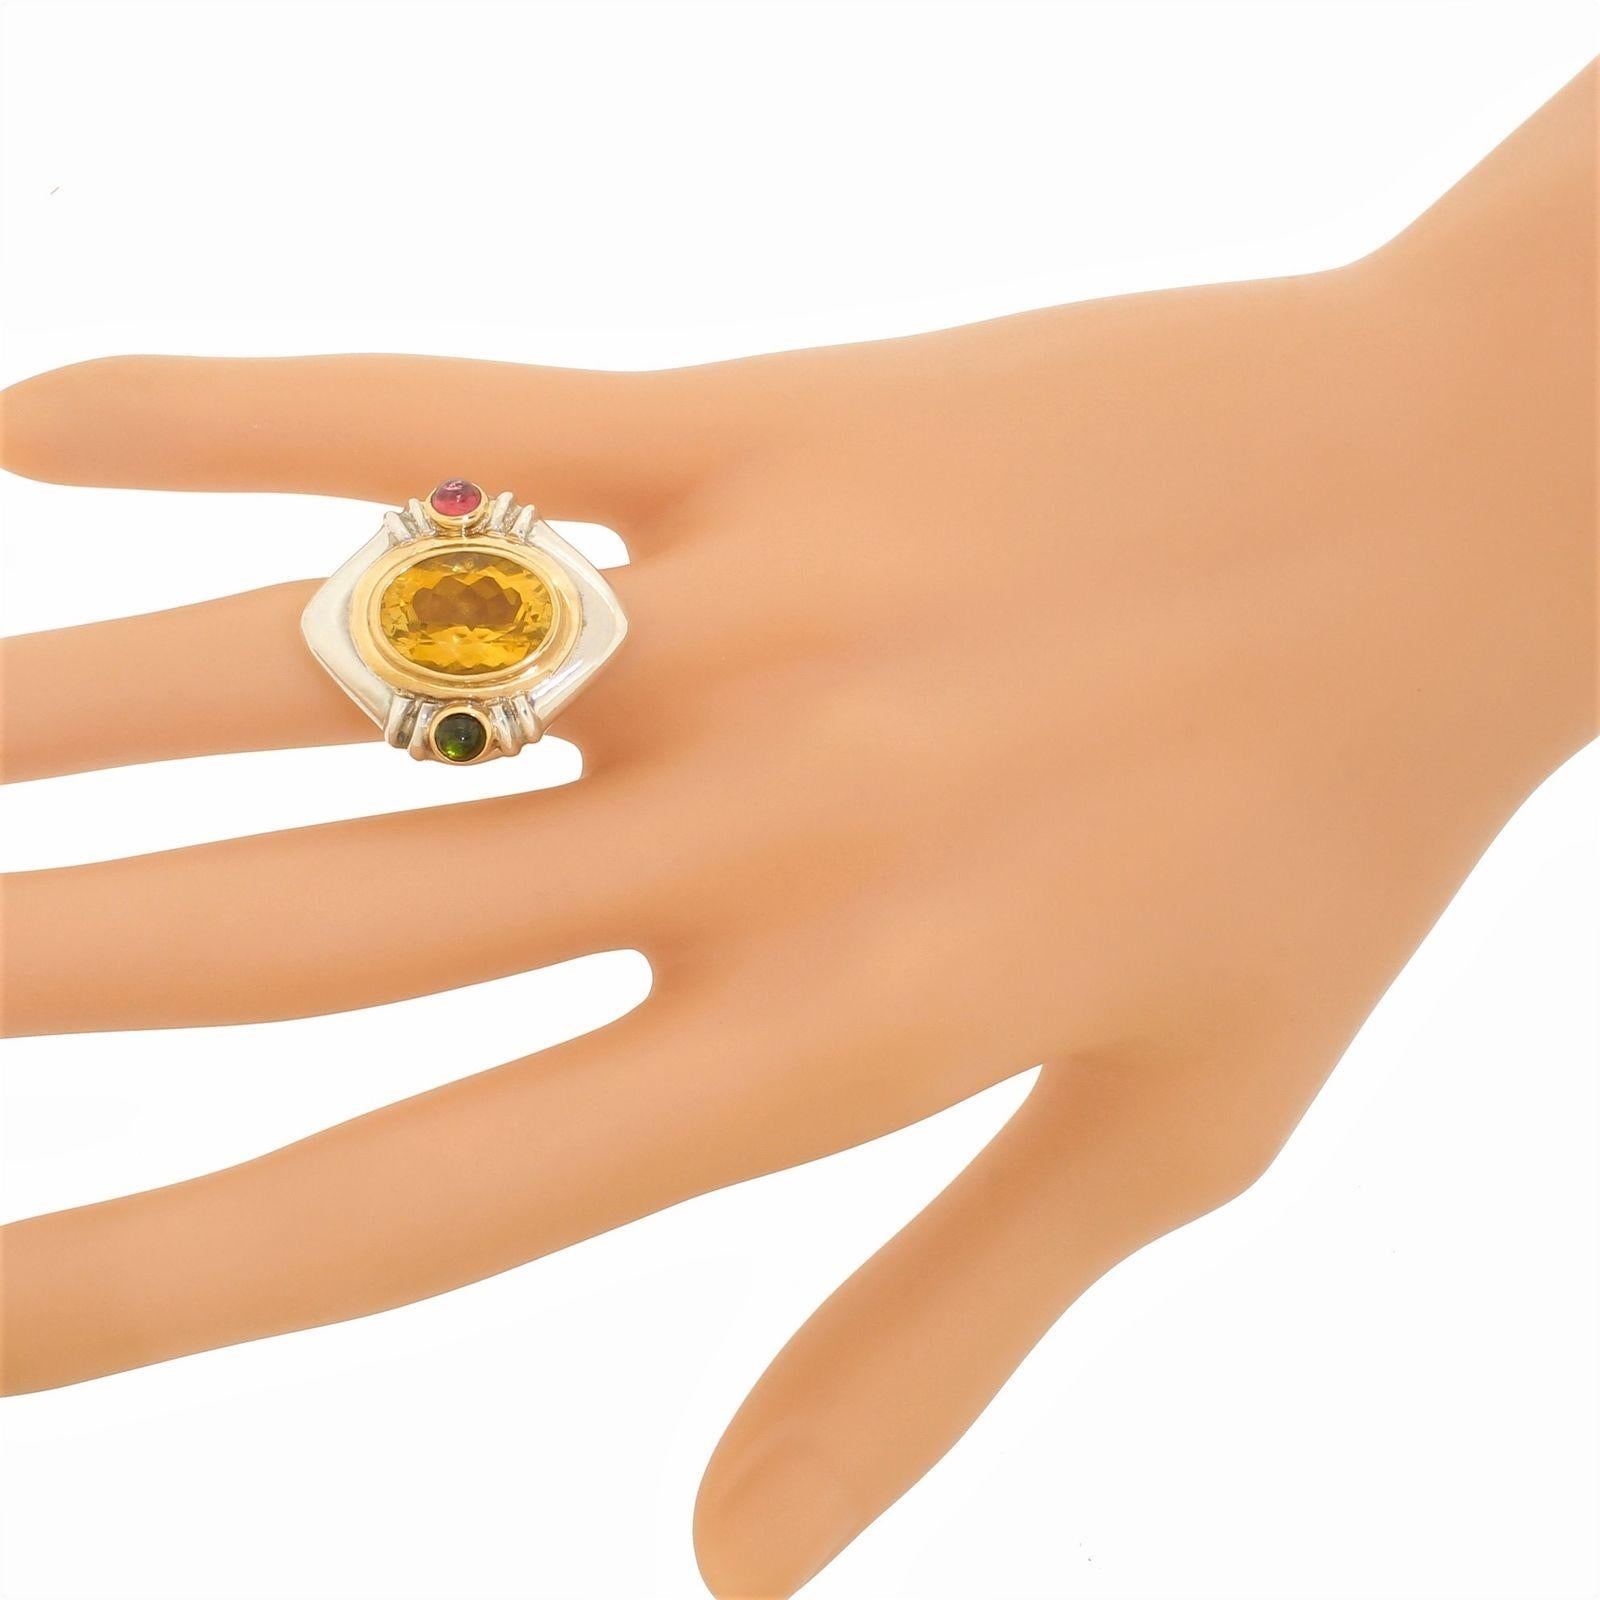 Mazza Bartholome Sterling Silver 14k Gold Citrine Ring, Featured in Vogue 1989 5